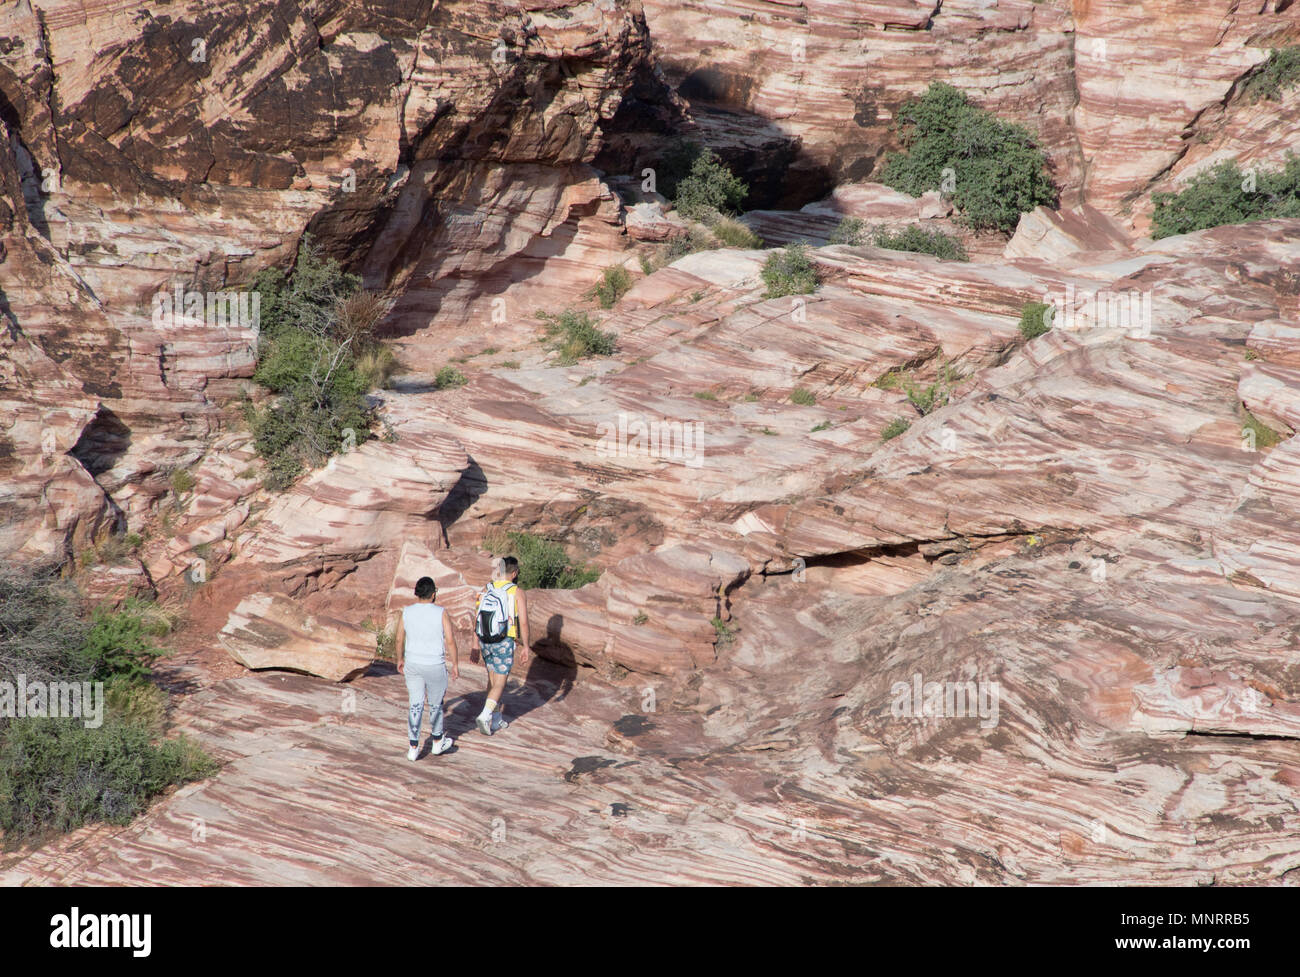 Hikers on sandstone, Calico Hills, Red Rock Canyon National Conservation Area, Las Vegas, Nevada Stock Photo